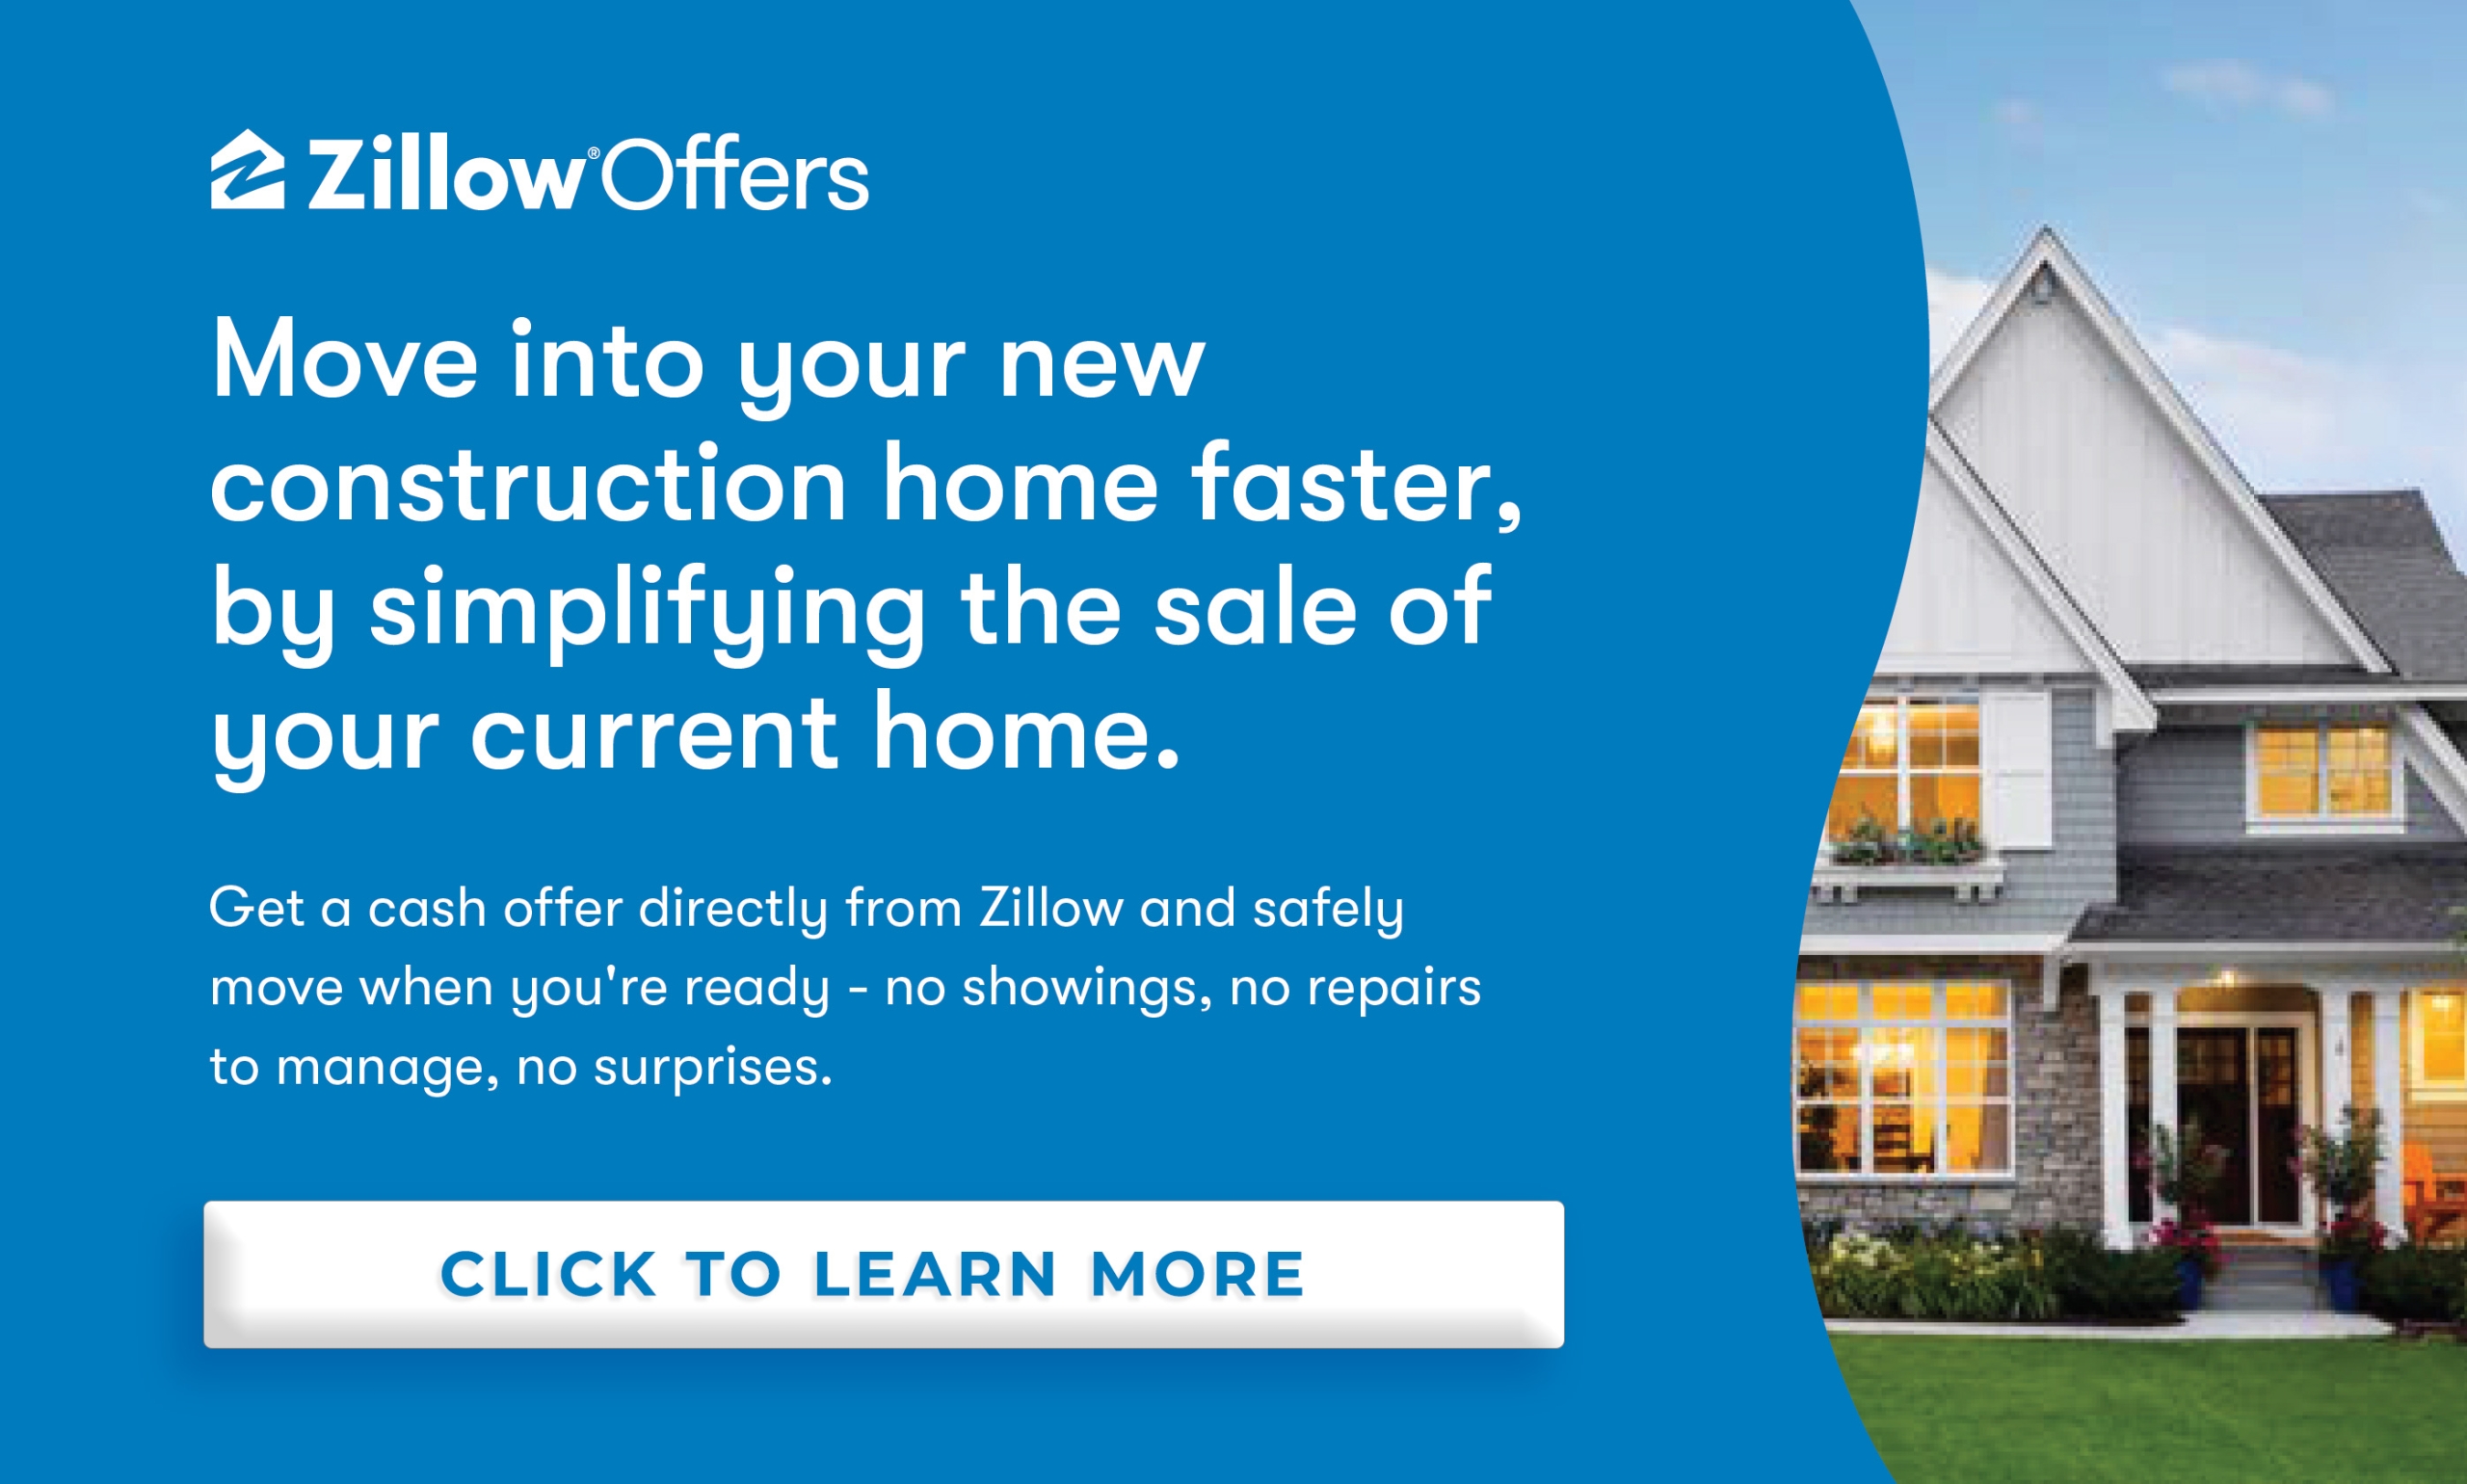 UnionMain Homes + Zillow Offers provide an option to move your new construction home faster by simplifying the sale of your current home.